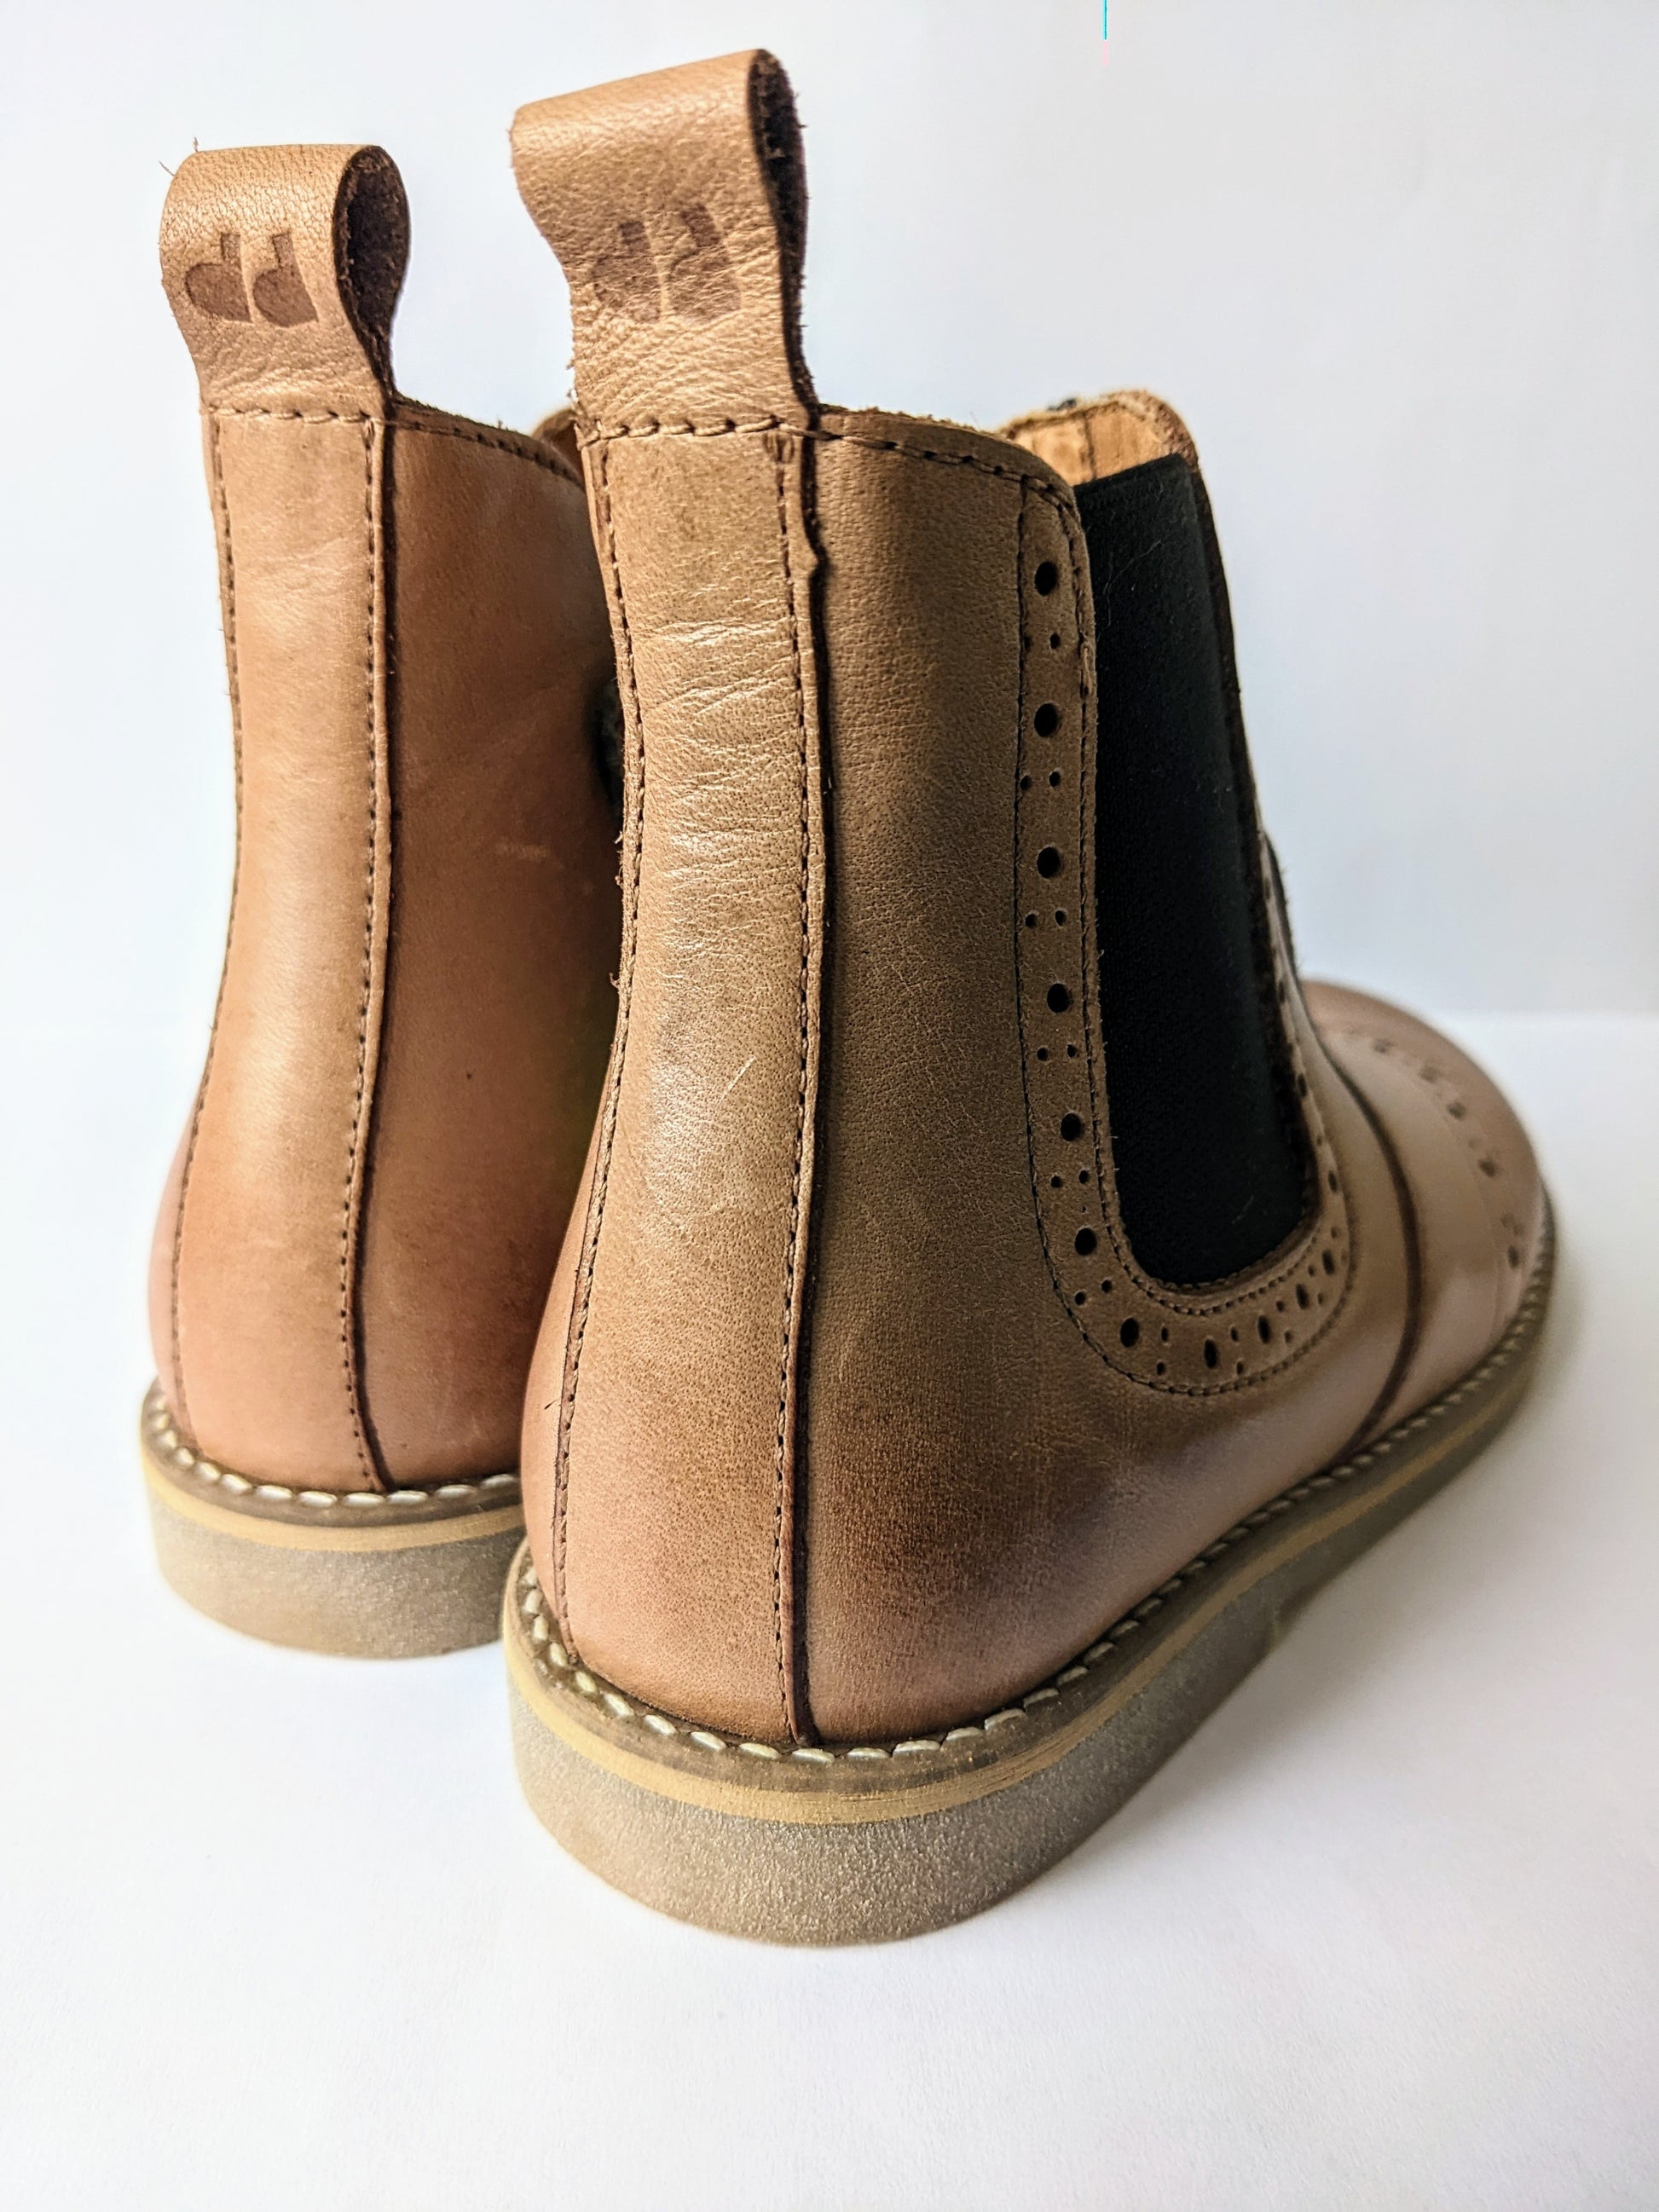 A pair of unisex ankle boots by Froddo,style G3160173-9 in tan leather with zip fastening. Back view.